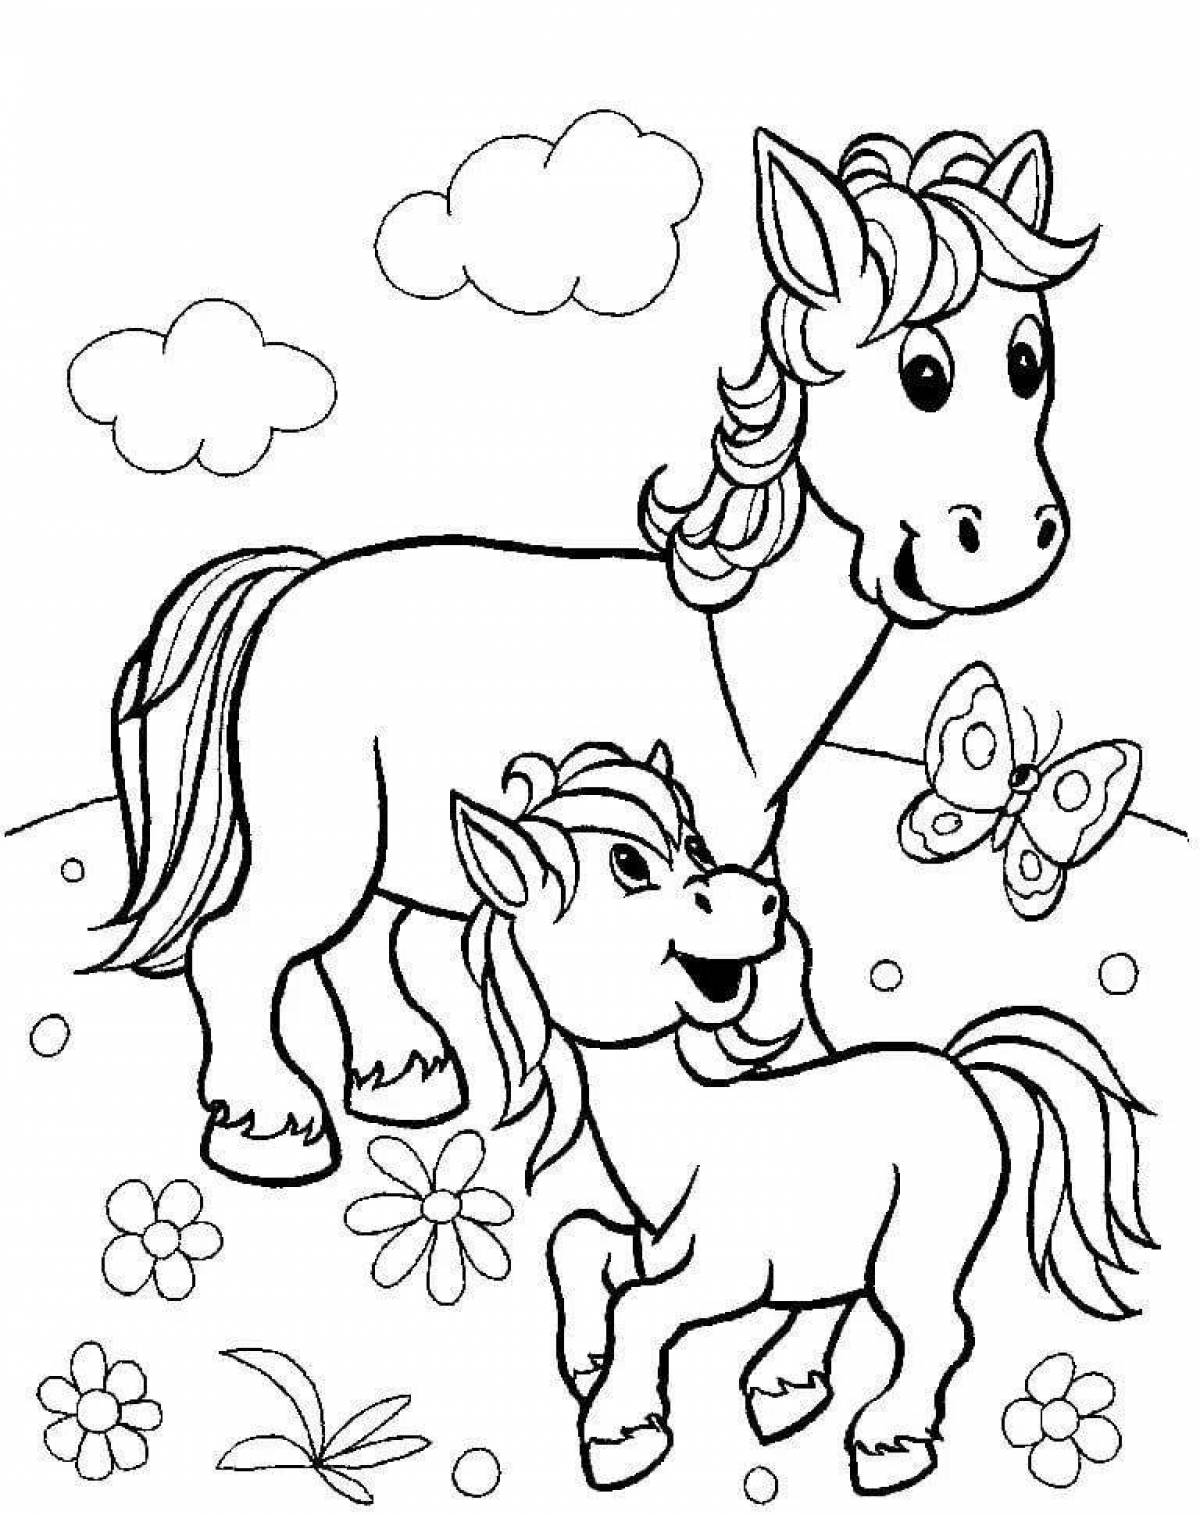 Exciting animal coloring book for kids